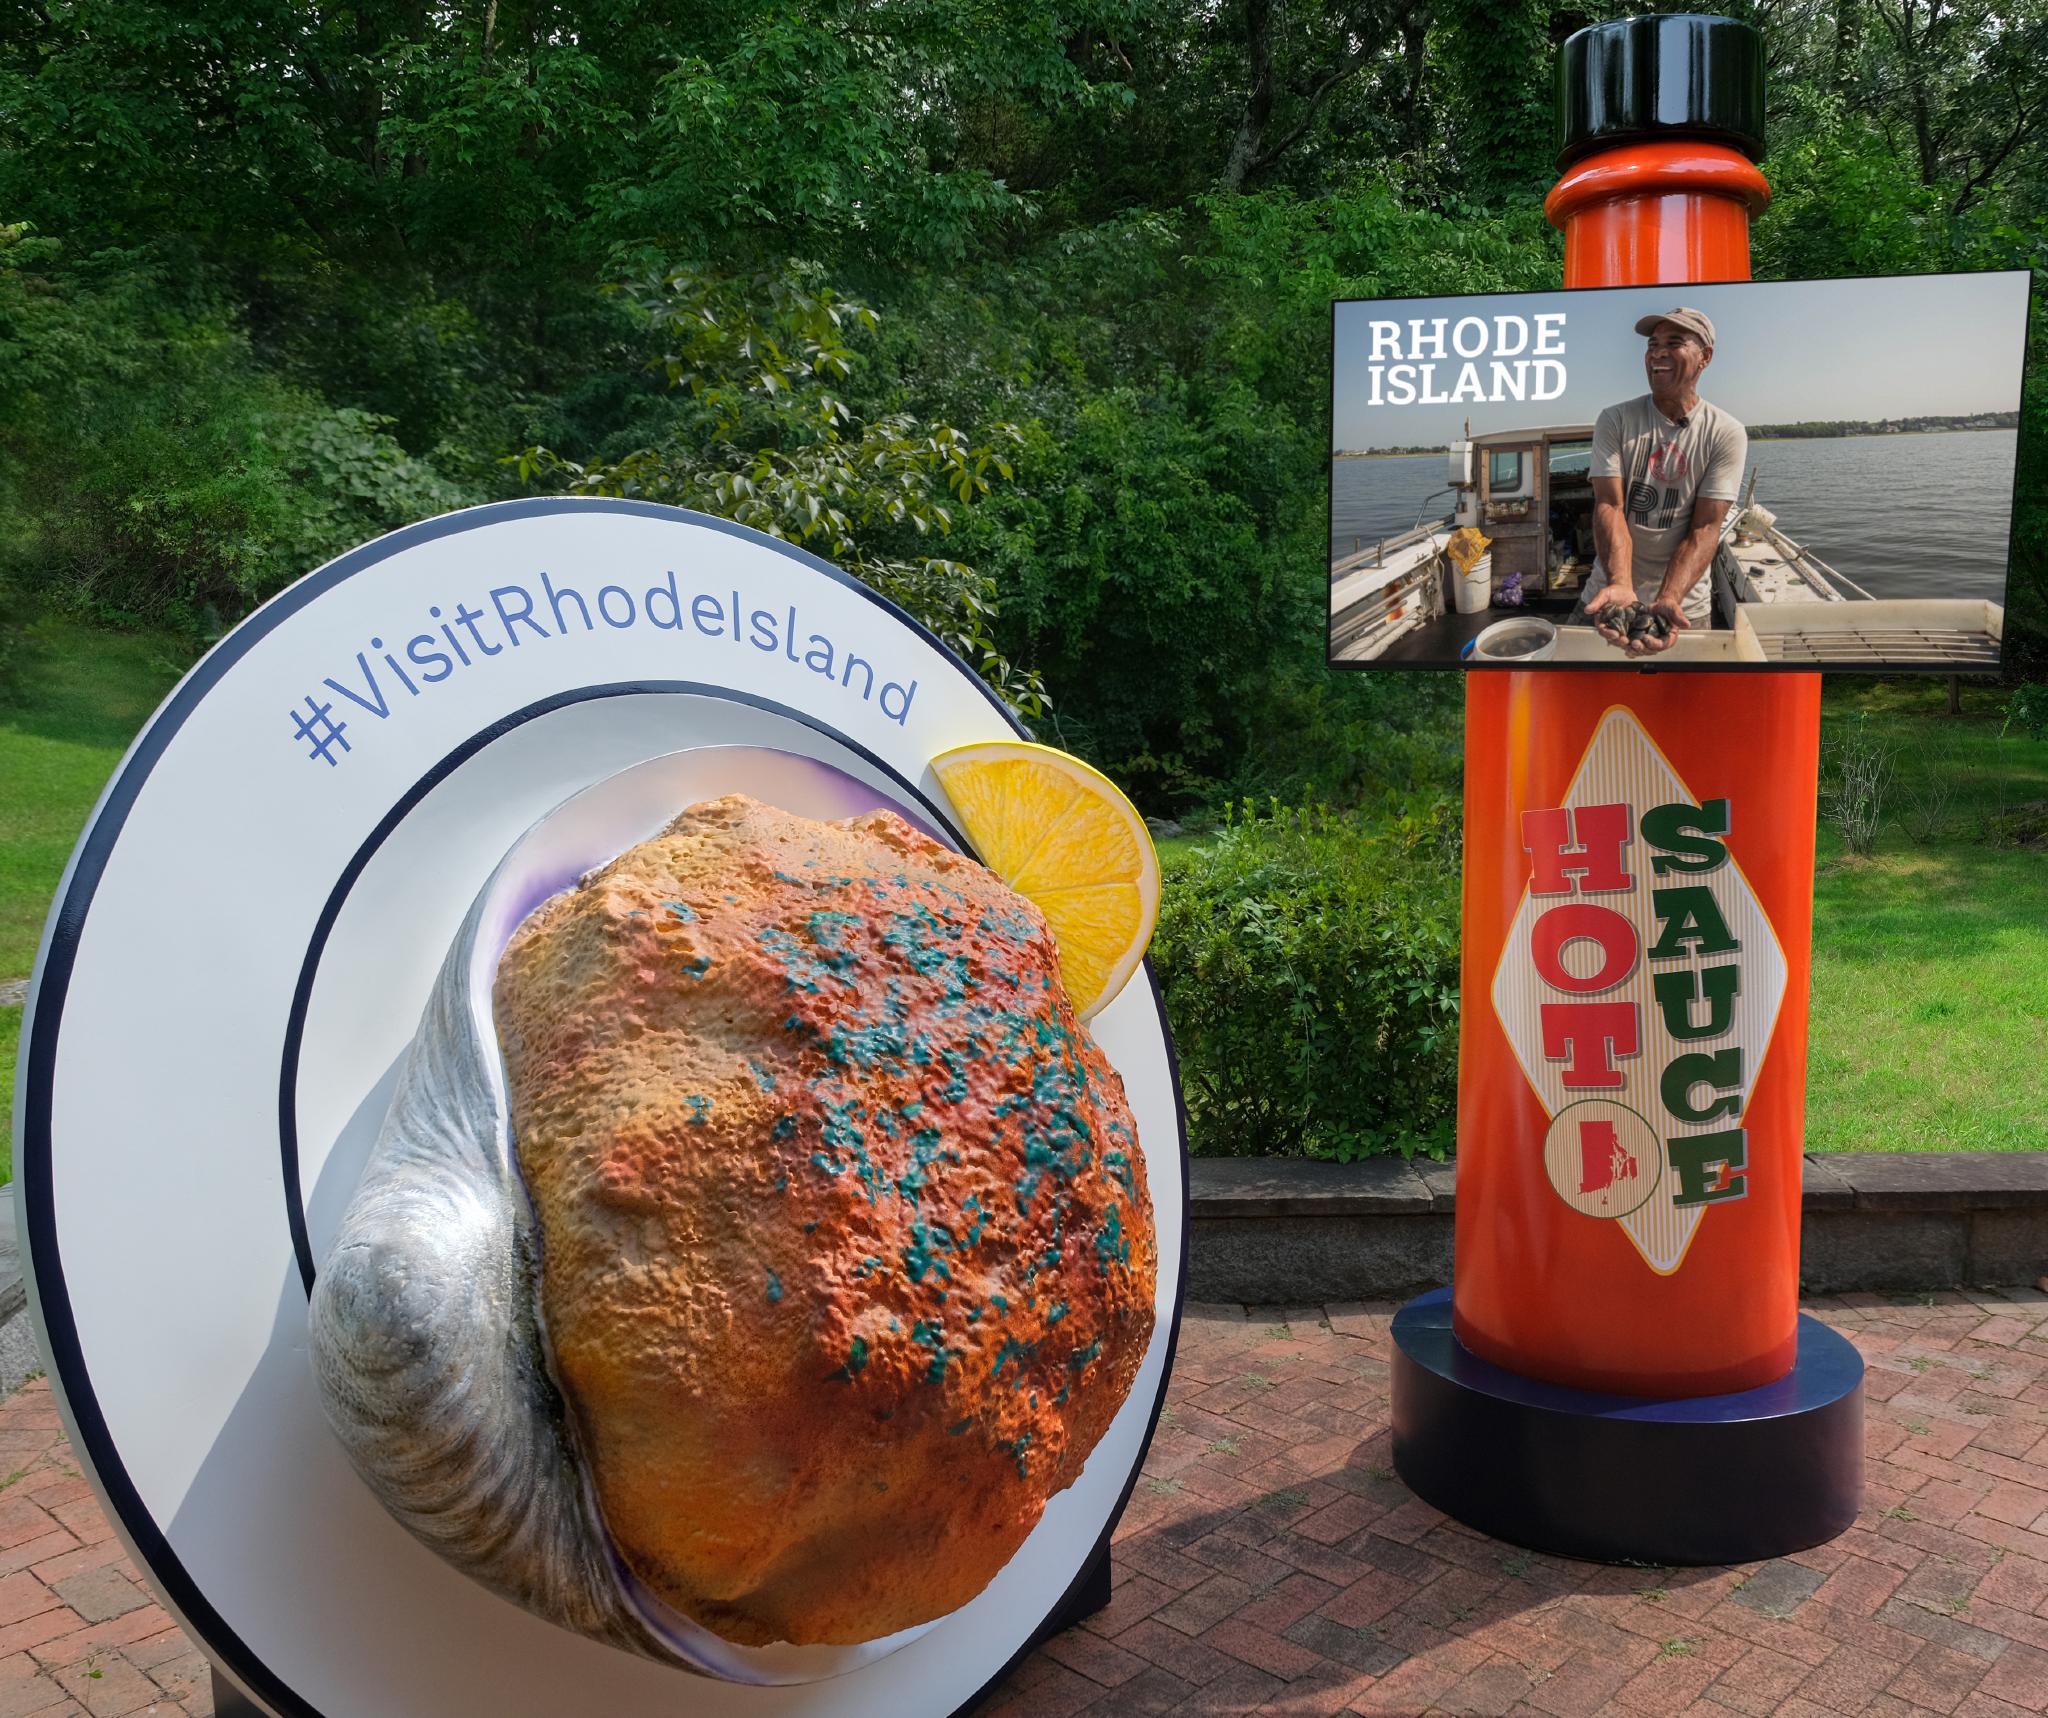 An image of a Rhode Island "stuffie" installation, a 200-pound styrofoam version of the baked clam, on a plate and next to an 8-foot bottle of hot sauce.